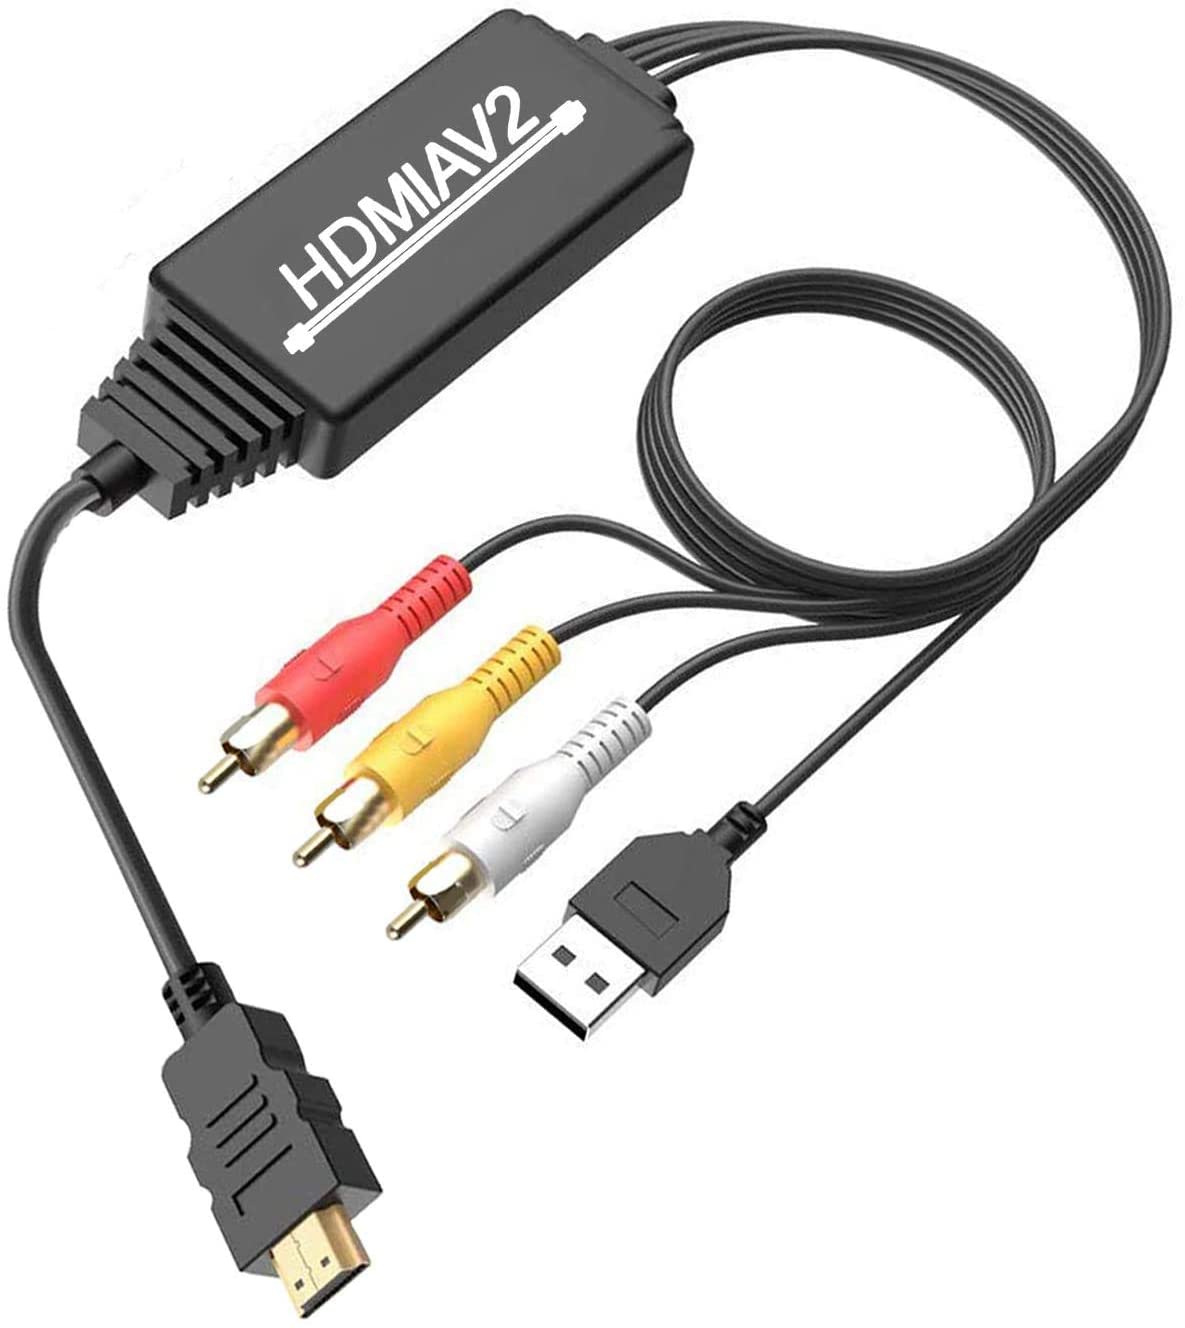 DIGITNOW! HDMI RCA Converter, to RCA Cable Adapter, 1080P HDMI